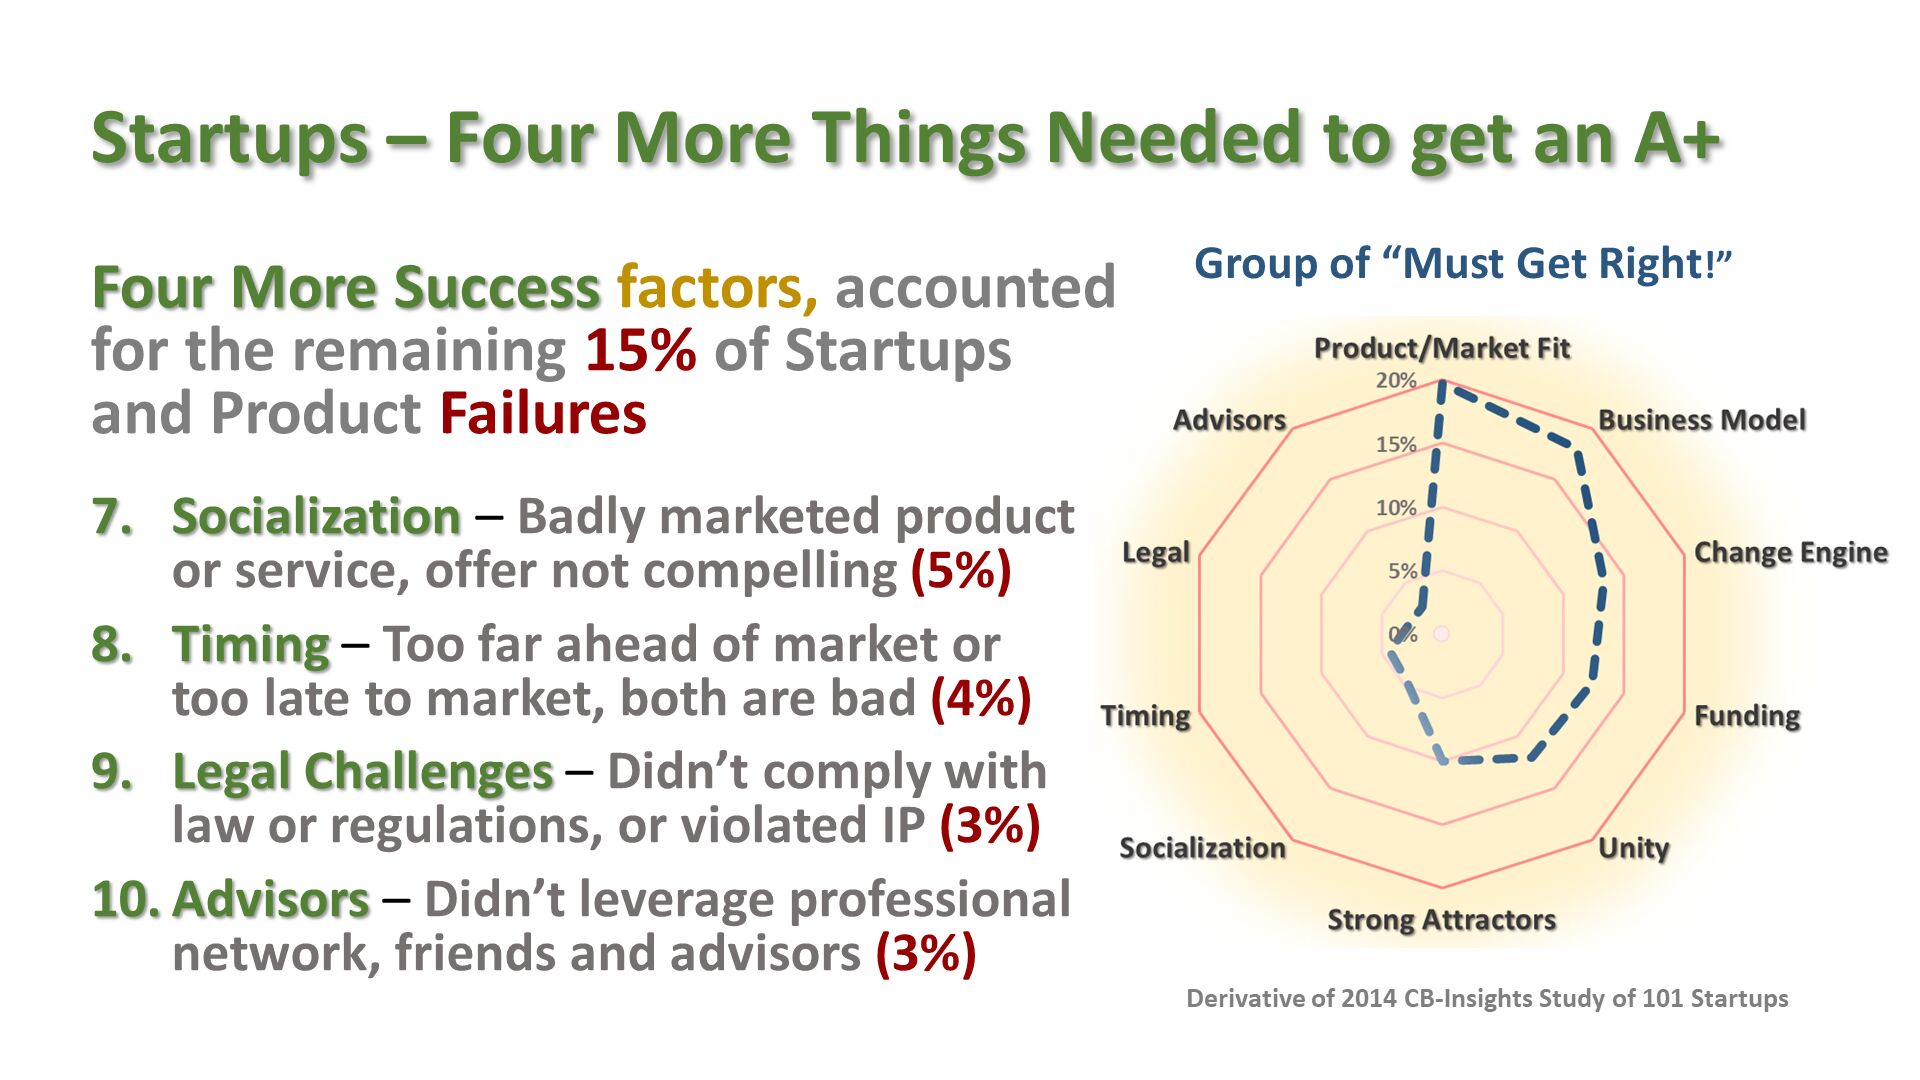 Startups – Four More Things Needed to get an A+ . Four More Success factors, accounted for the remaining 15% of Startups and Product Failures
Socialization – Badly marketed product or service, offer not compelling (5%)
Timing – Too far ahead of market or too late to market, both are bad (4%)
Legal Challenges – Didn’t comply with law or regulations, or violated IP (3%)
Advisors – Didn’t leverage professional network, friends and advisors (3%)
. Group of “Must Get Right!”. Derivative of 2014 CB-Insights Study of 101 Startups . 